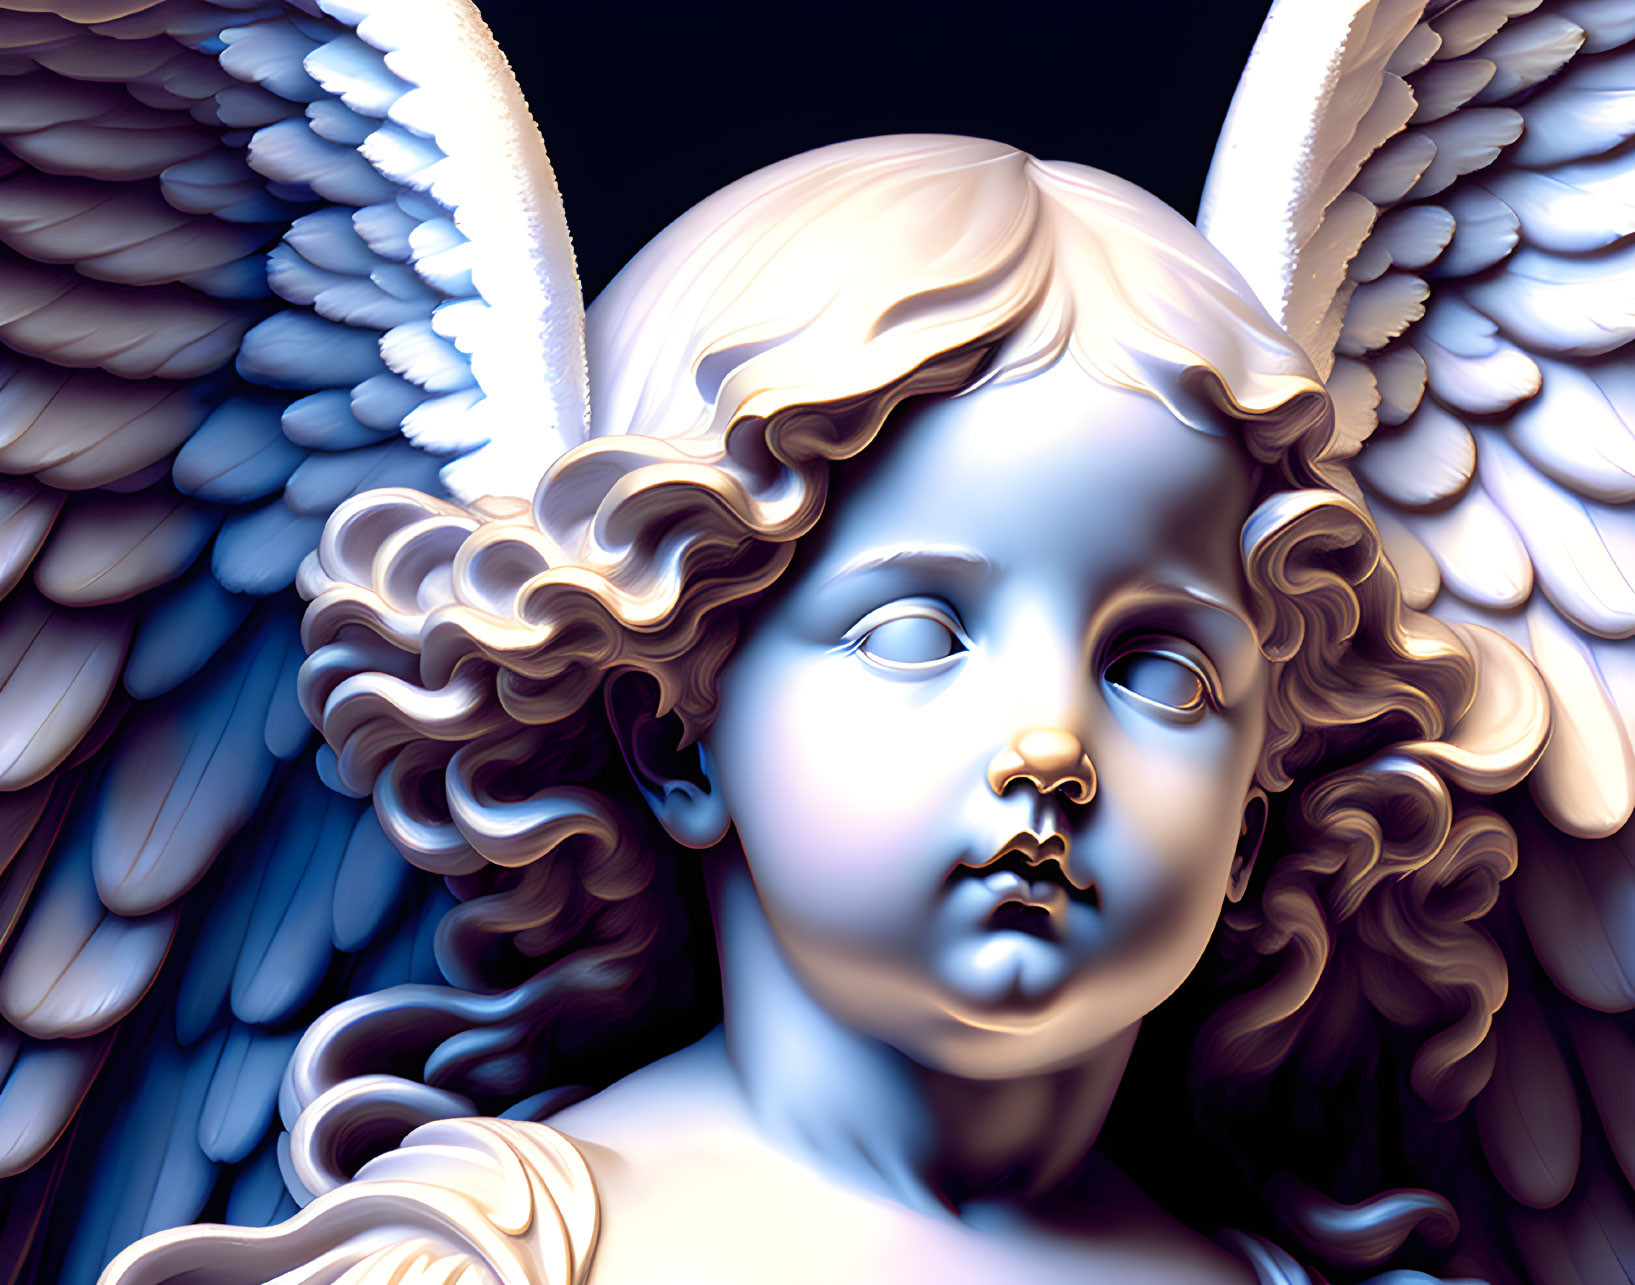 Cherubic figure with curly hair and feathered wings on dark background